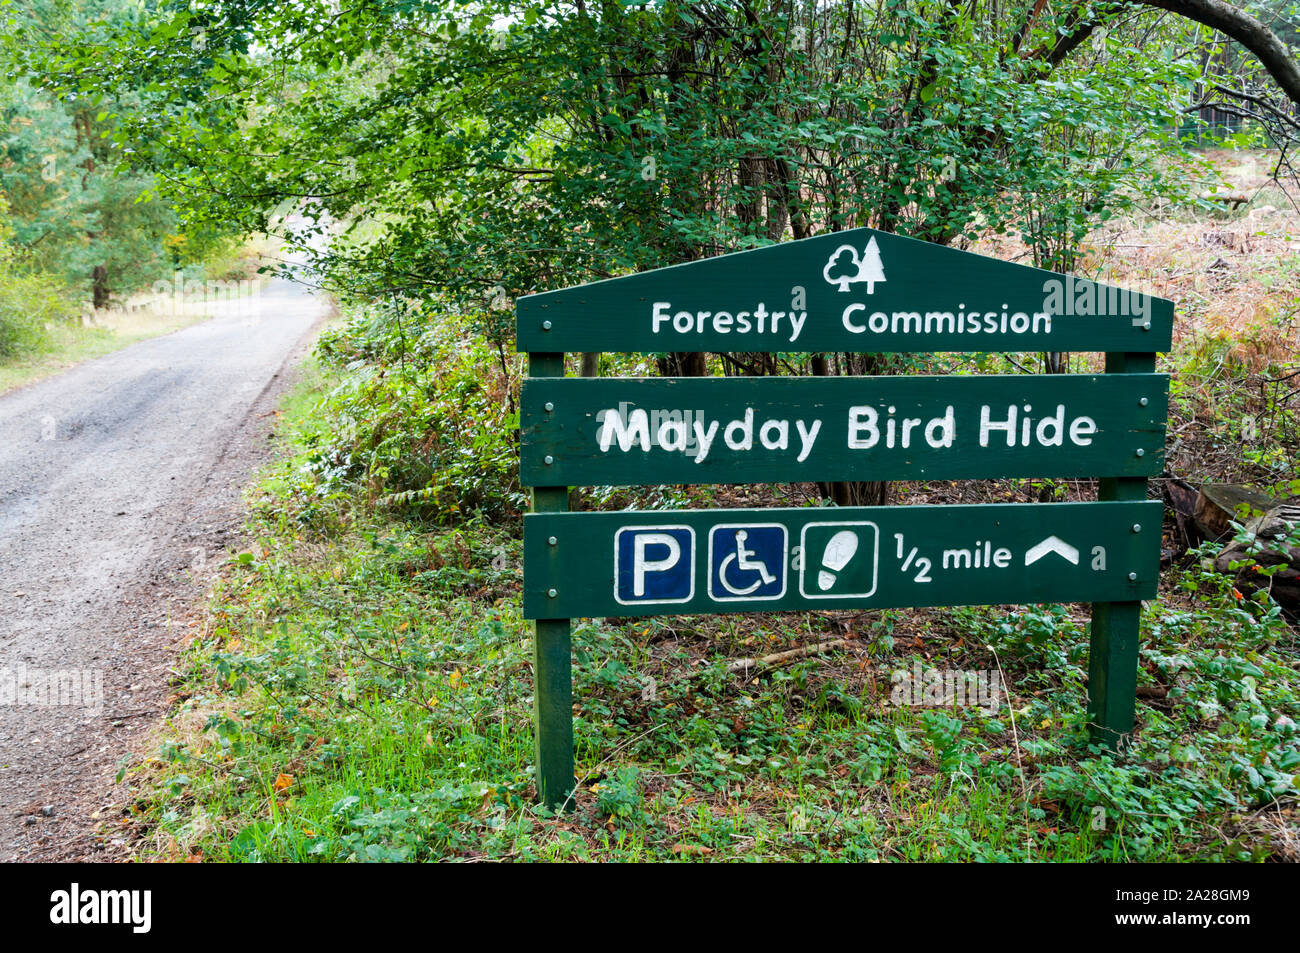 A Forestry Commission sign for Mayday Bird Hide beside a track in Thetford Forest. With icons for parking, wheelchair access & footpaths. Stock Photo